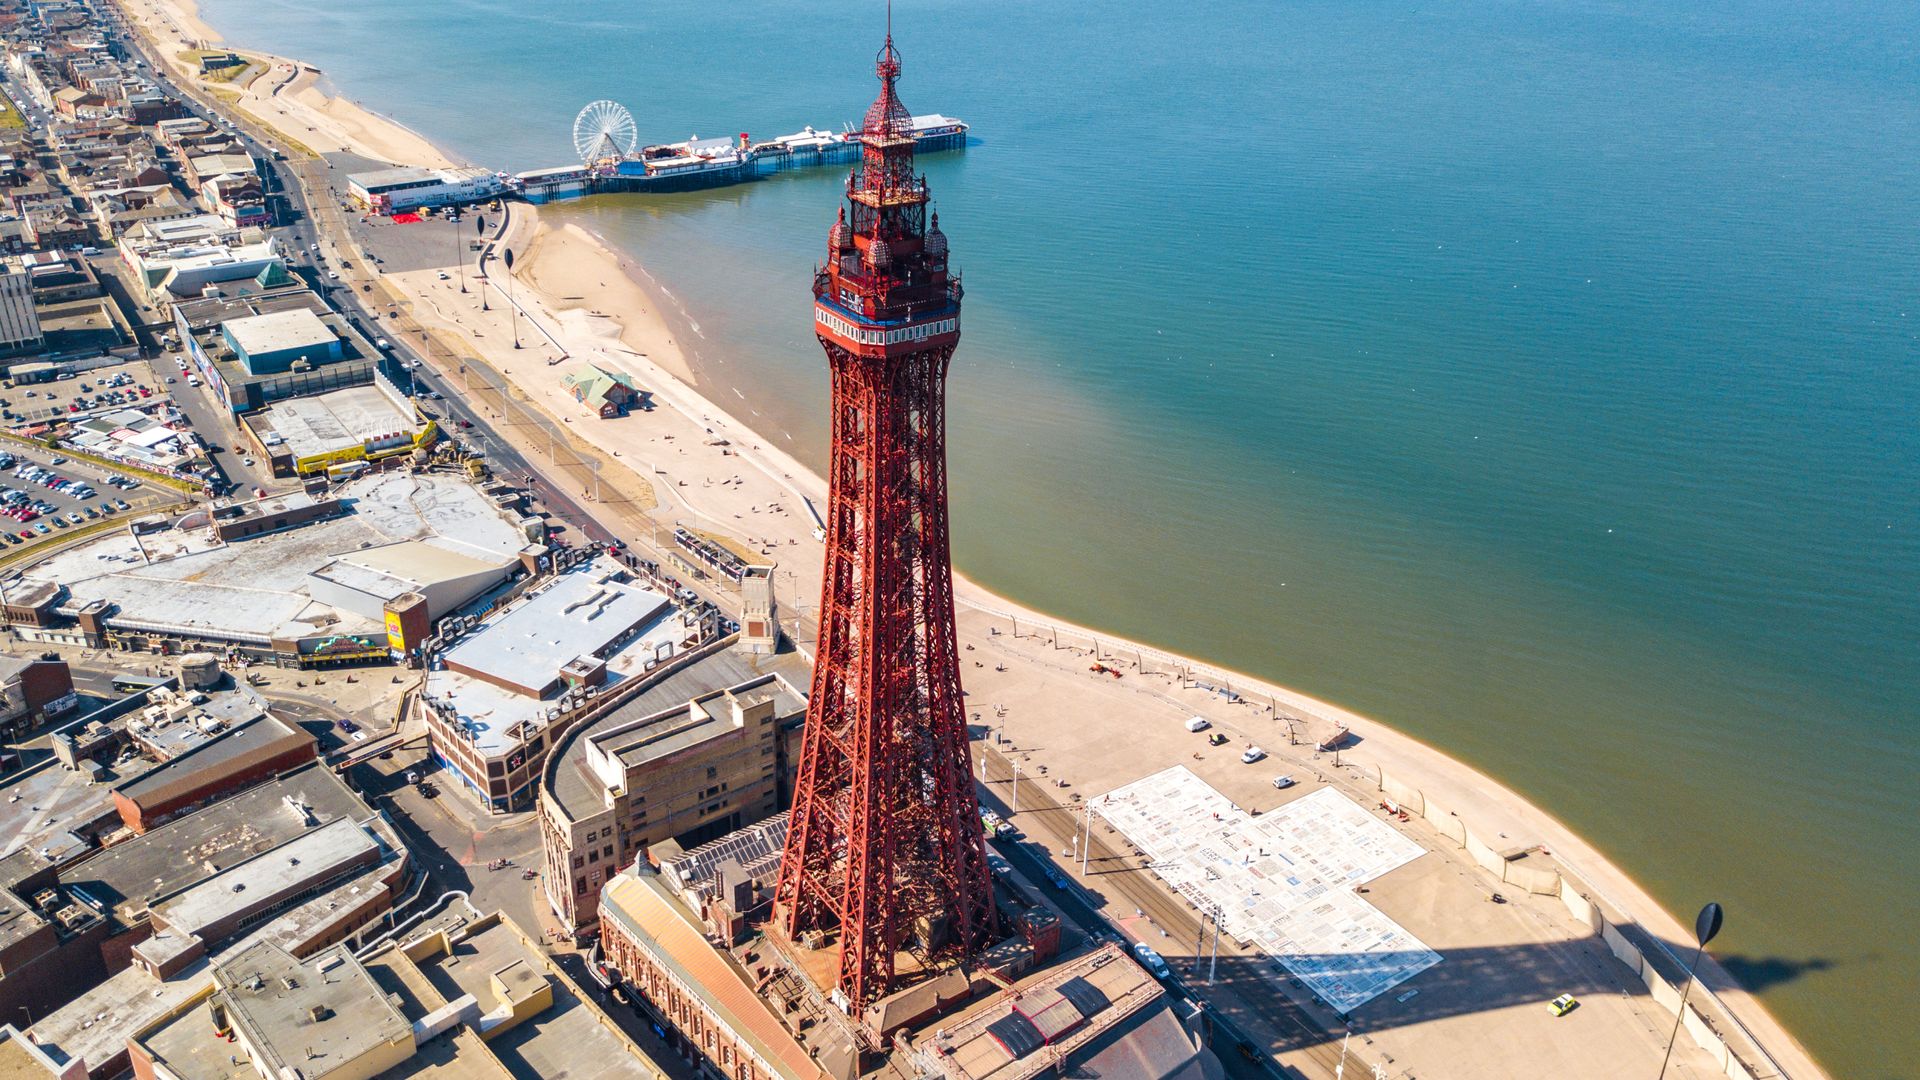 Circus performer injured after falling from 'wheel of faith' at Blackpool Tower